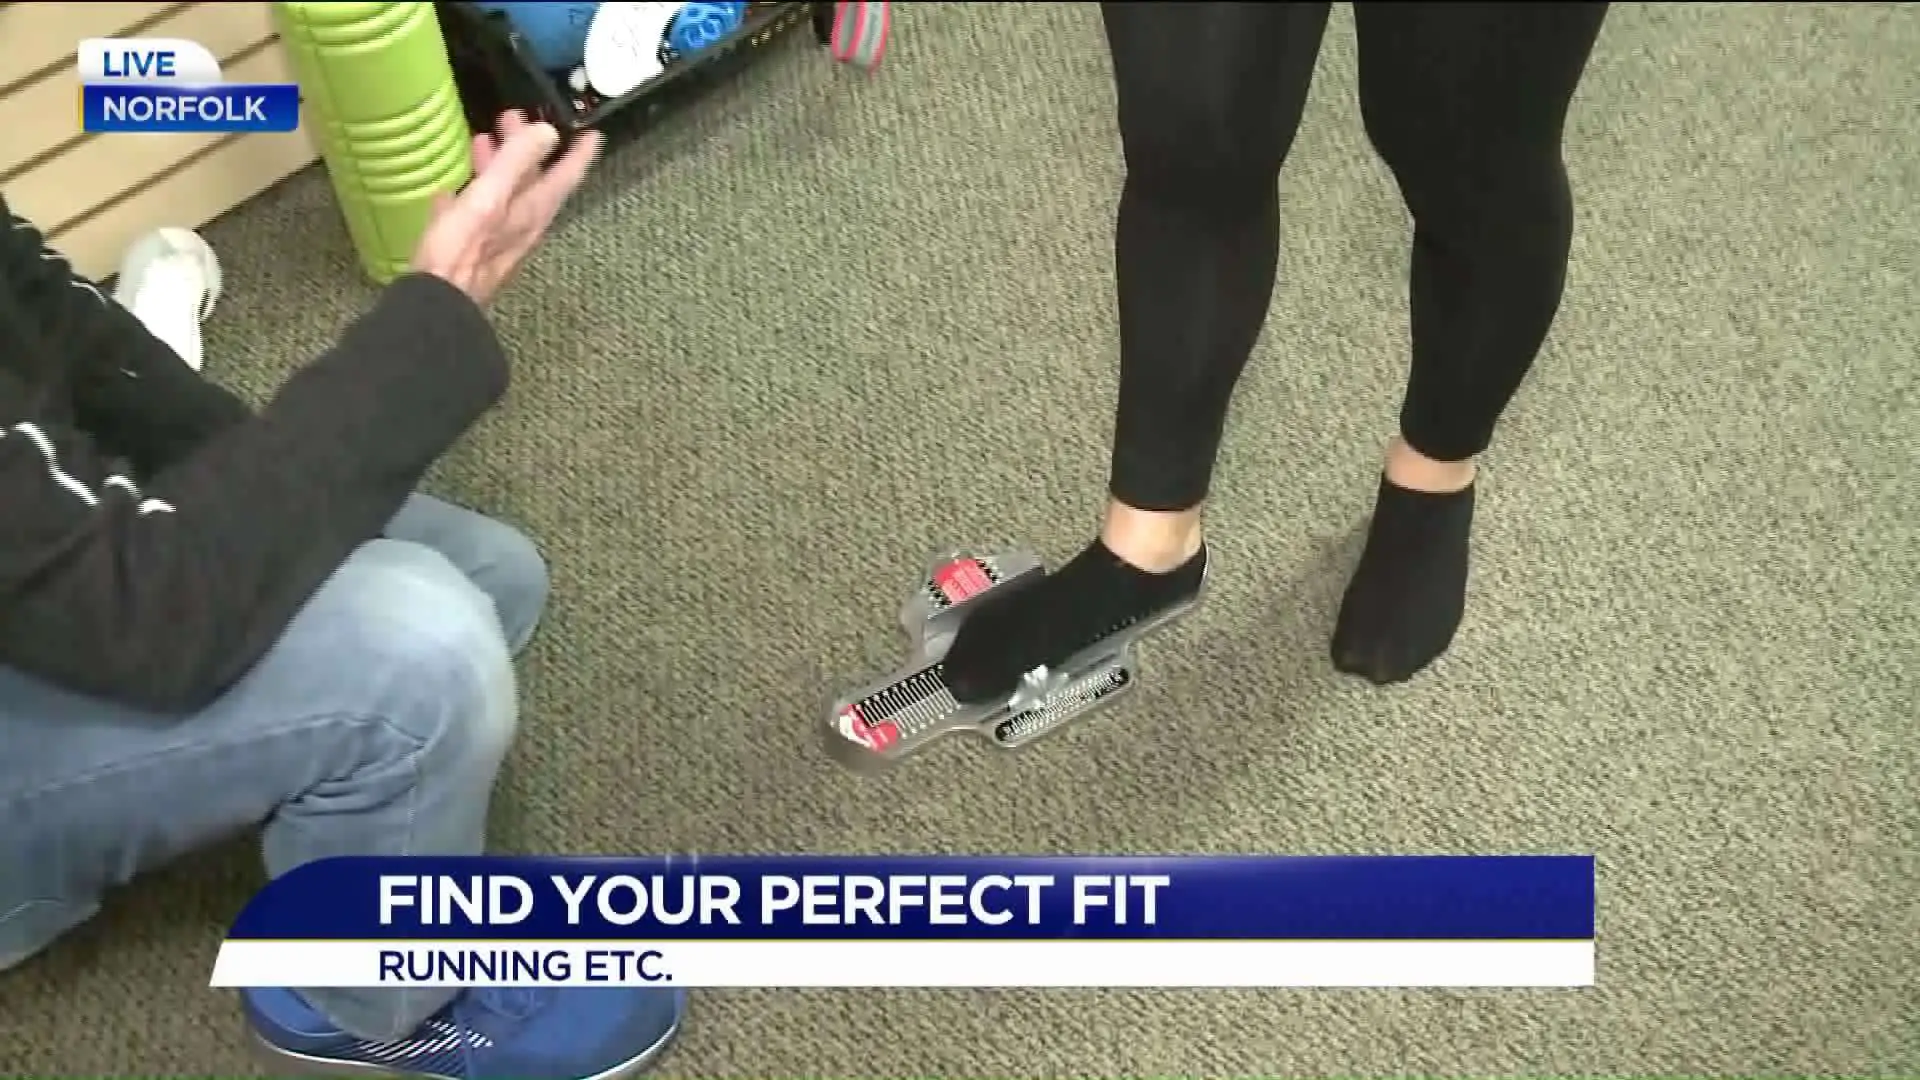 Find your perfect fit at Running Etc. in Norfolk